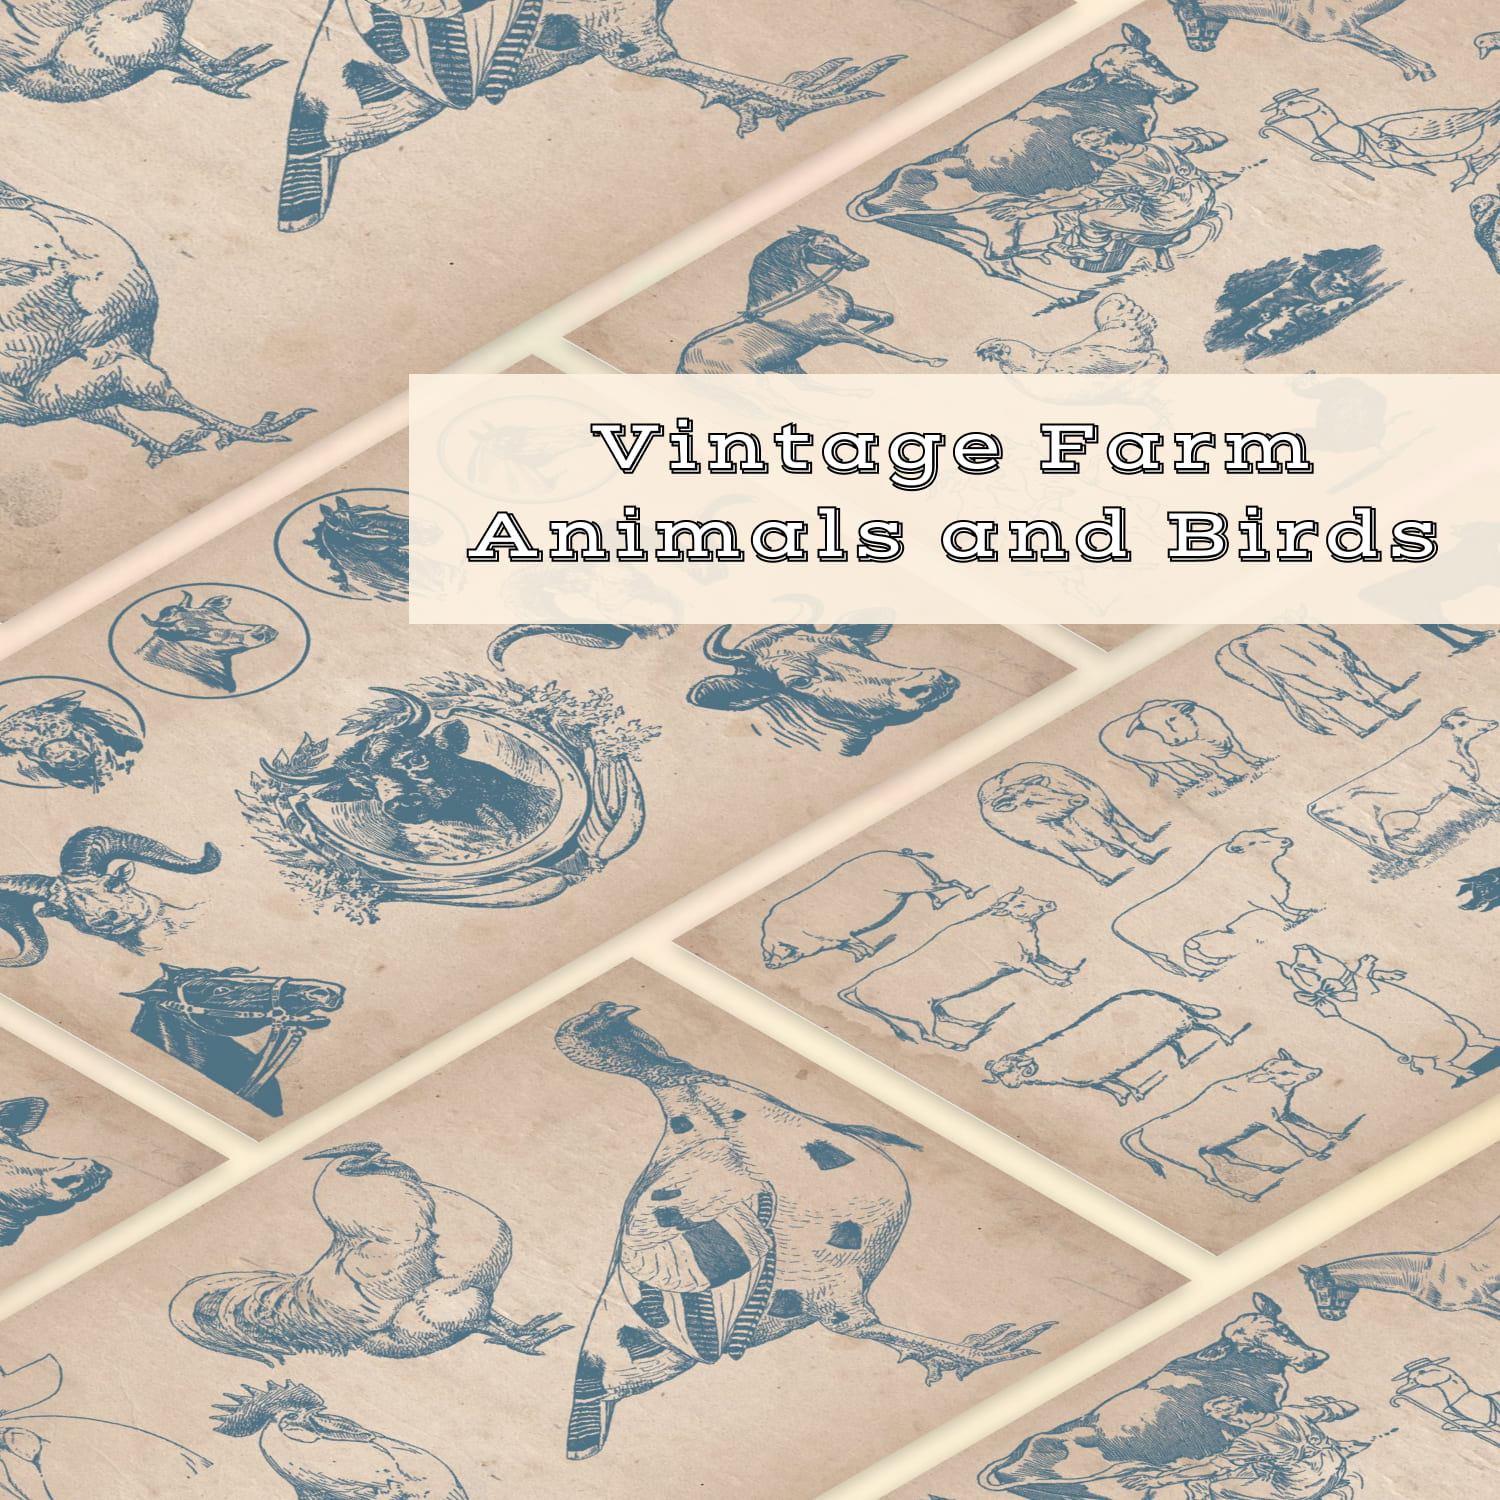 Selection of hand drawn farm animals and birds.